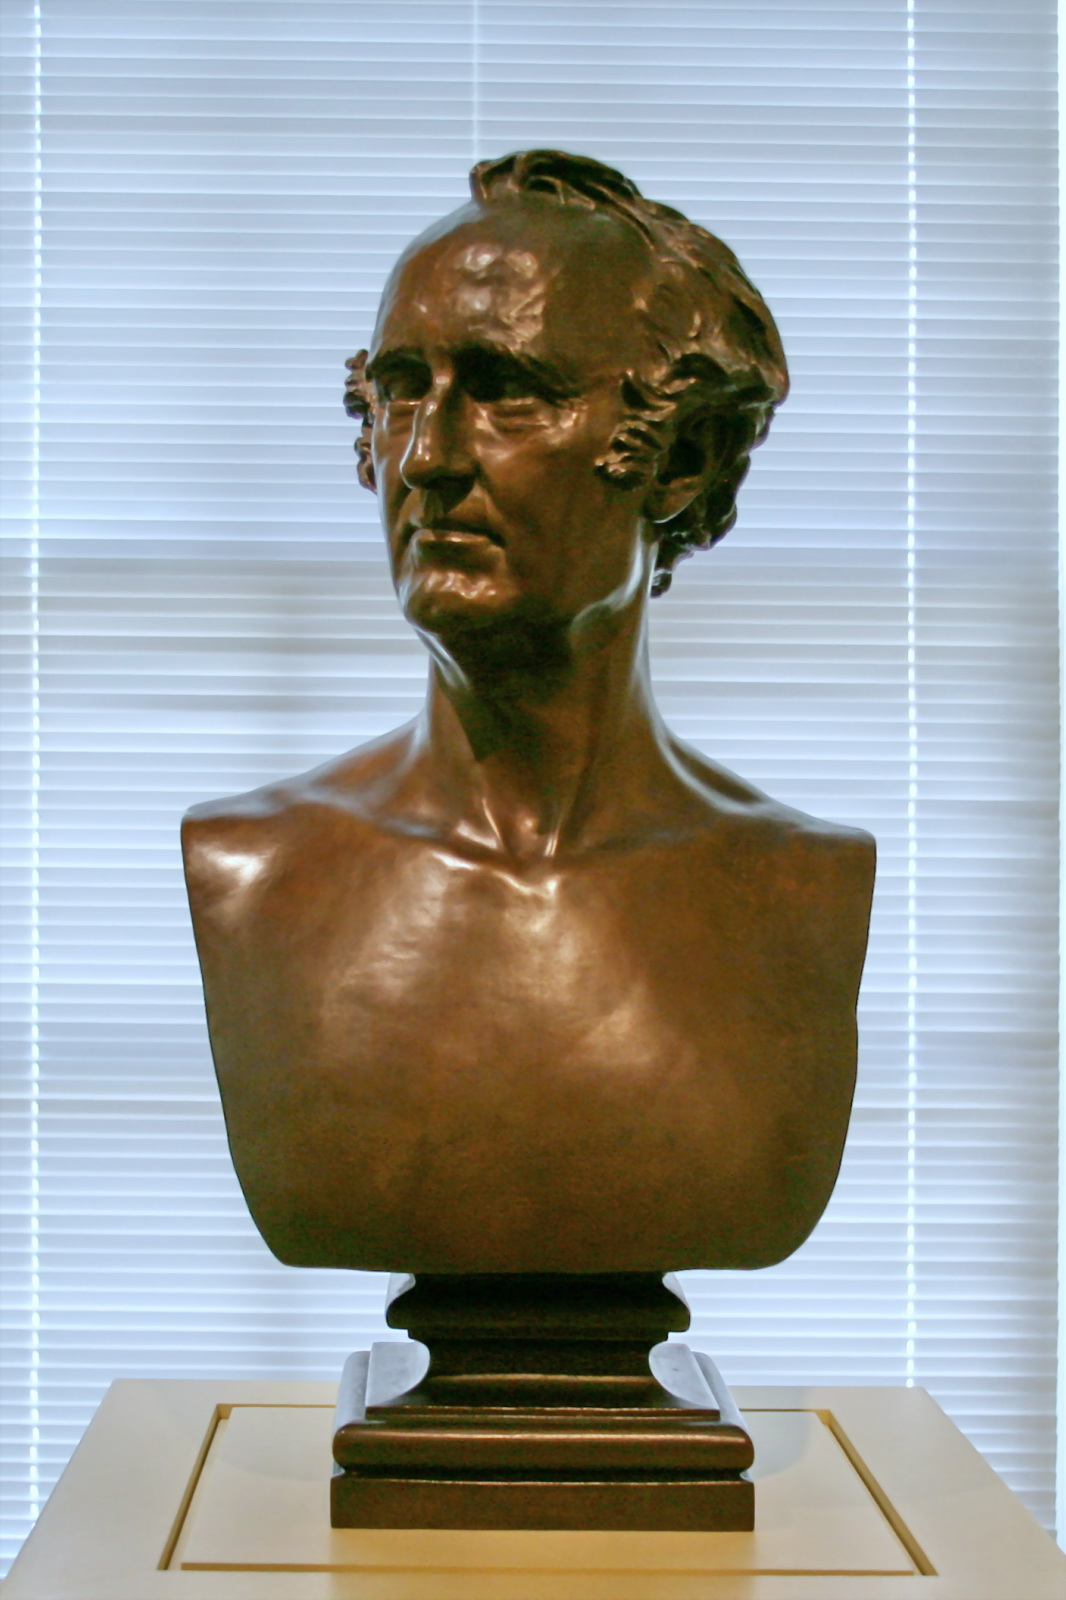 there is a close up view of a bust of an old man